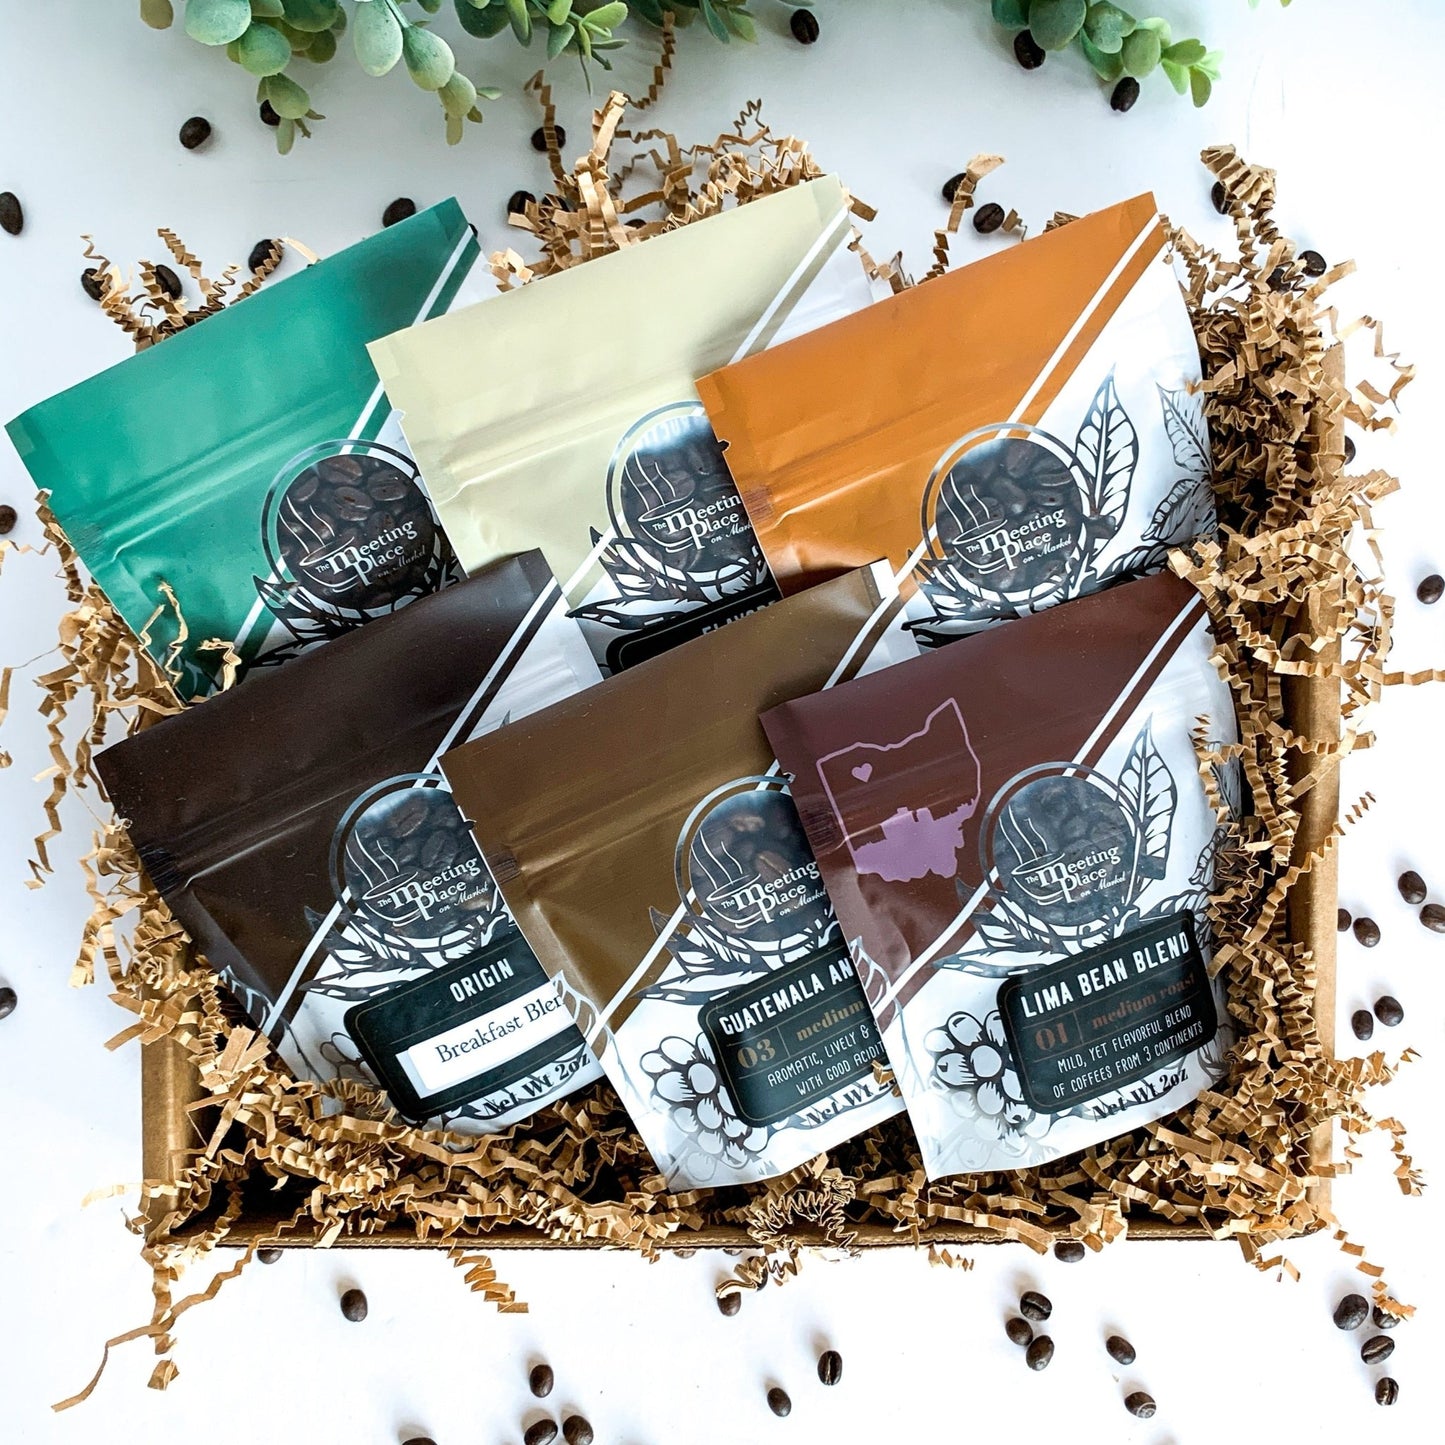 Decaf Coffee Sampler Variety Gift Box Mother's Day Gift Basket - The Meeting Place on Market